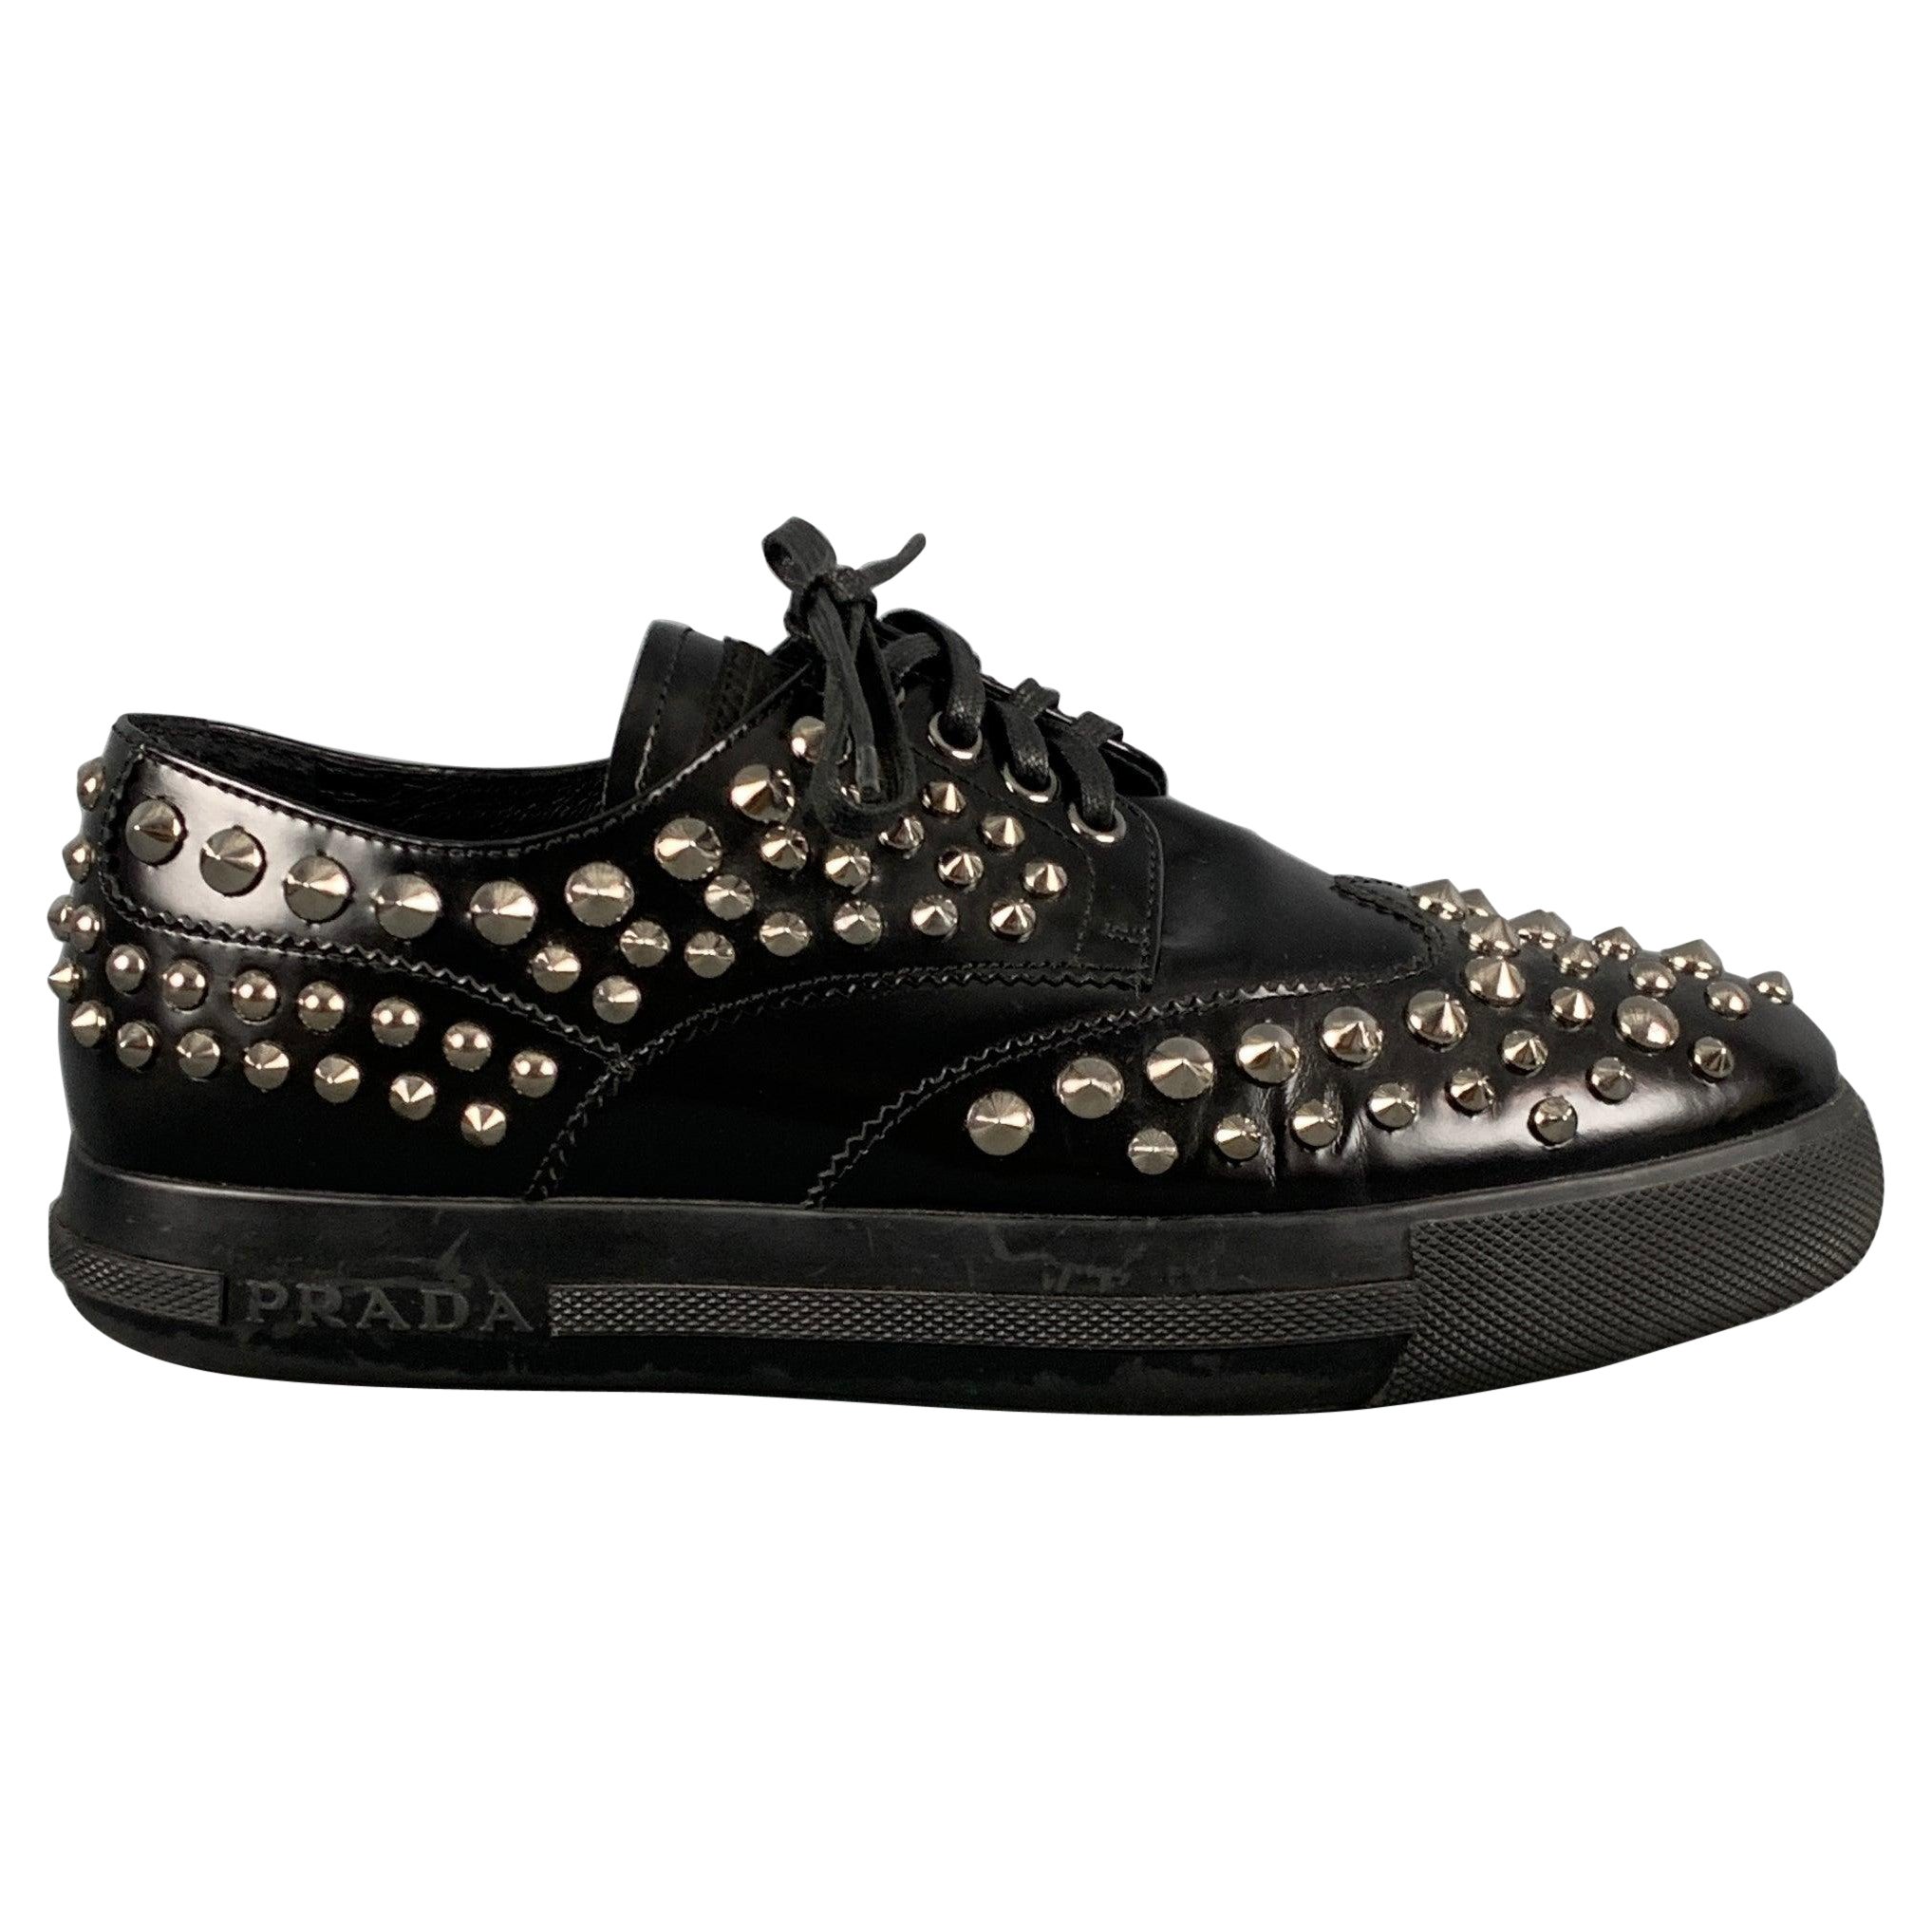 PRADA Size 7.5 Black Leather Studded Lace Up Laces For Sale